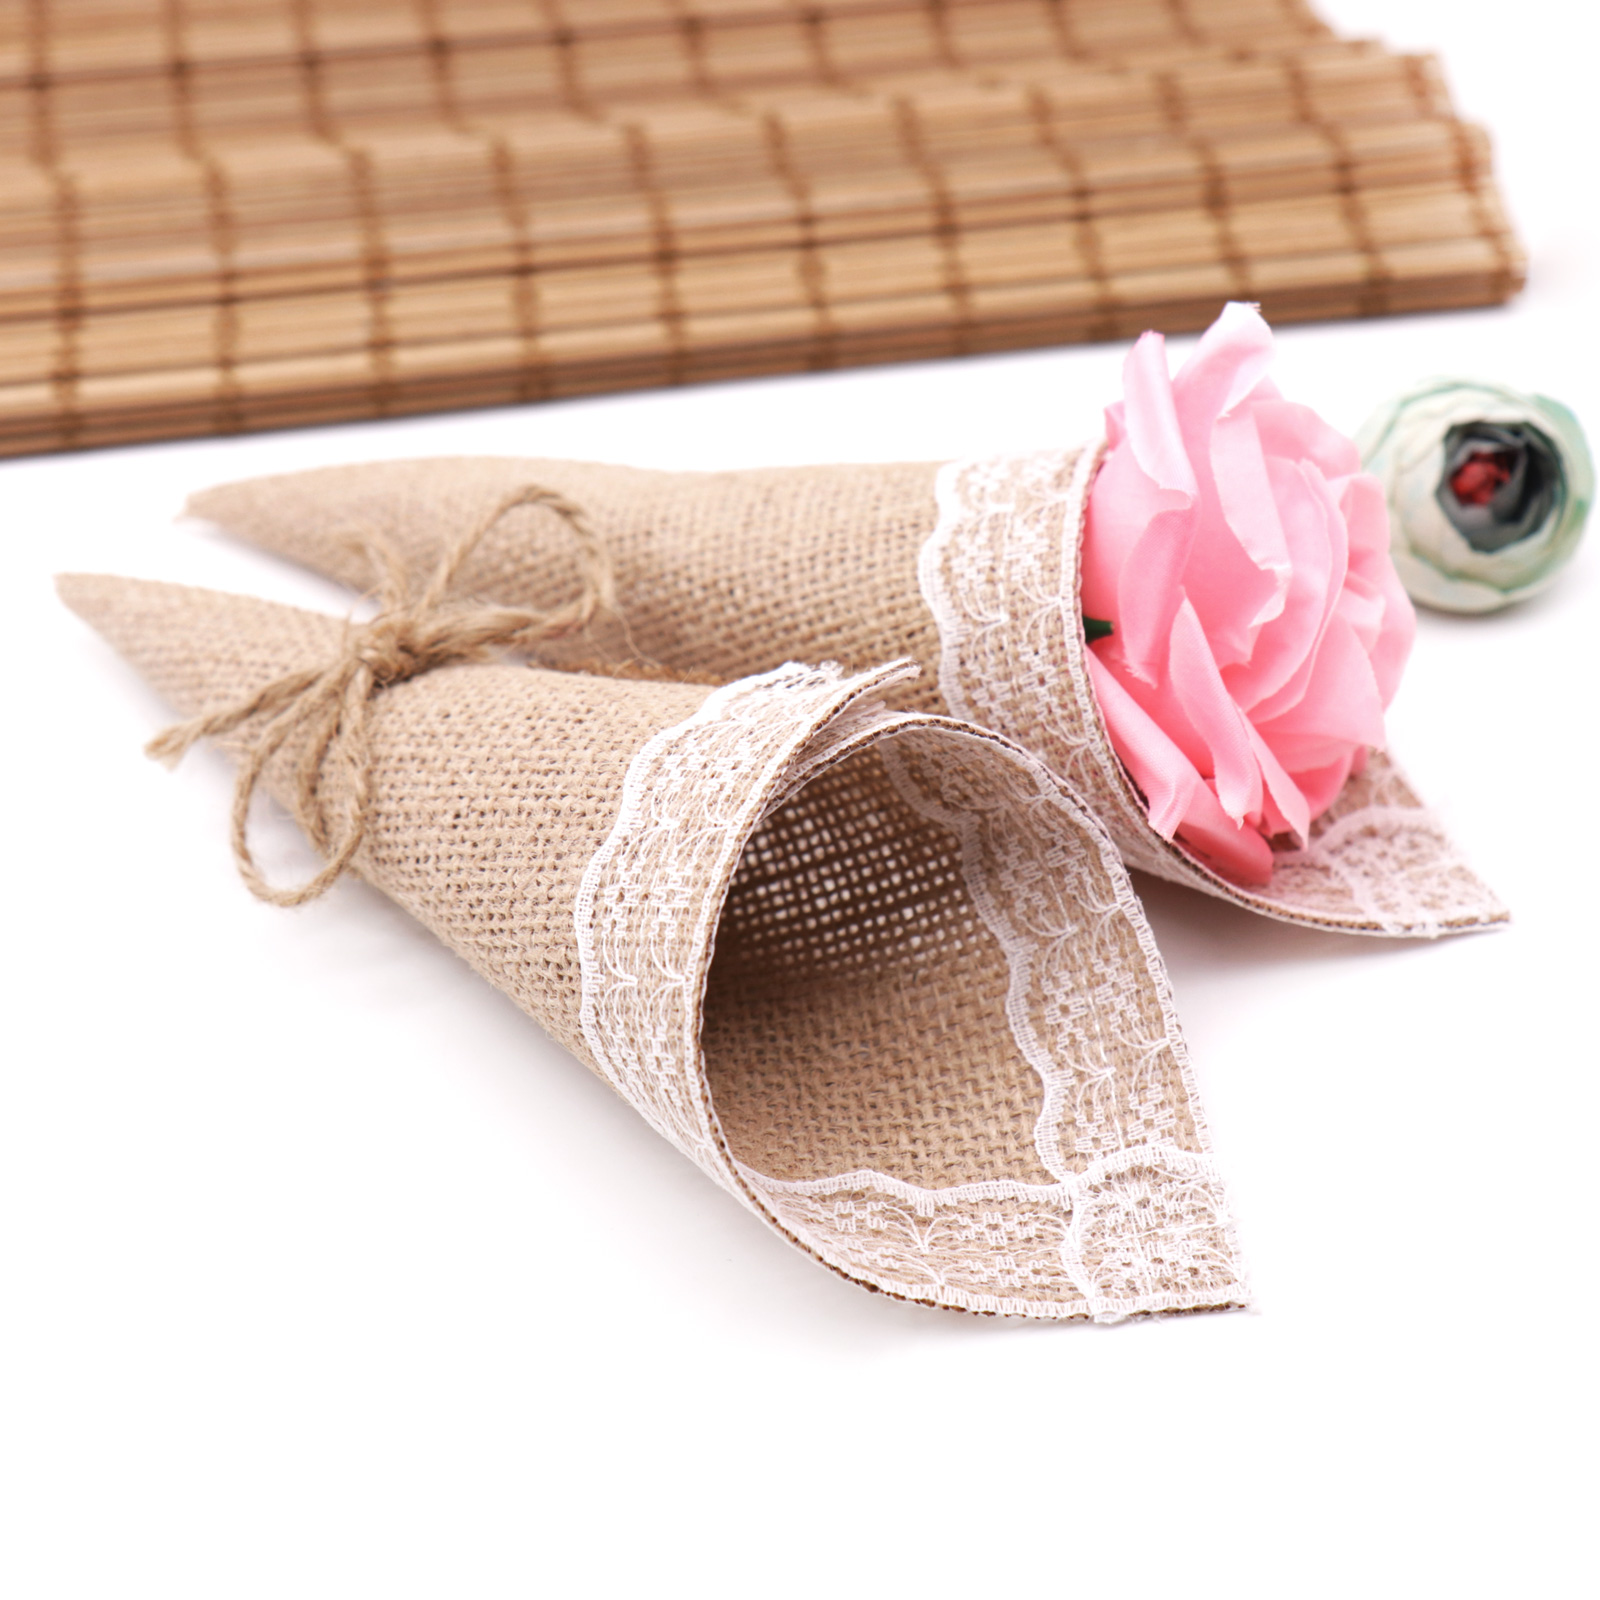 Creative Burlap Lace Cone Bouquet 10pcs DIY Handmade Flower Packaging Box +3M Linen Rope for Wedding Birthday Party Decoration